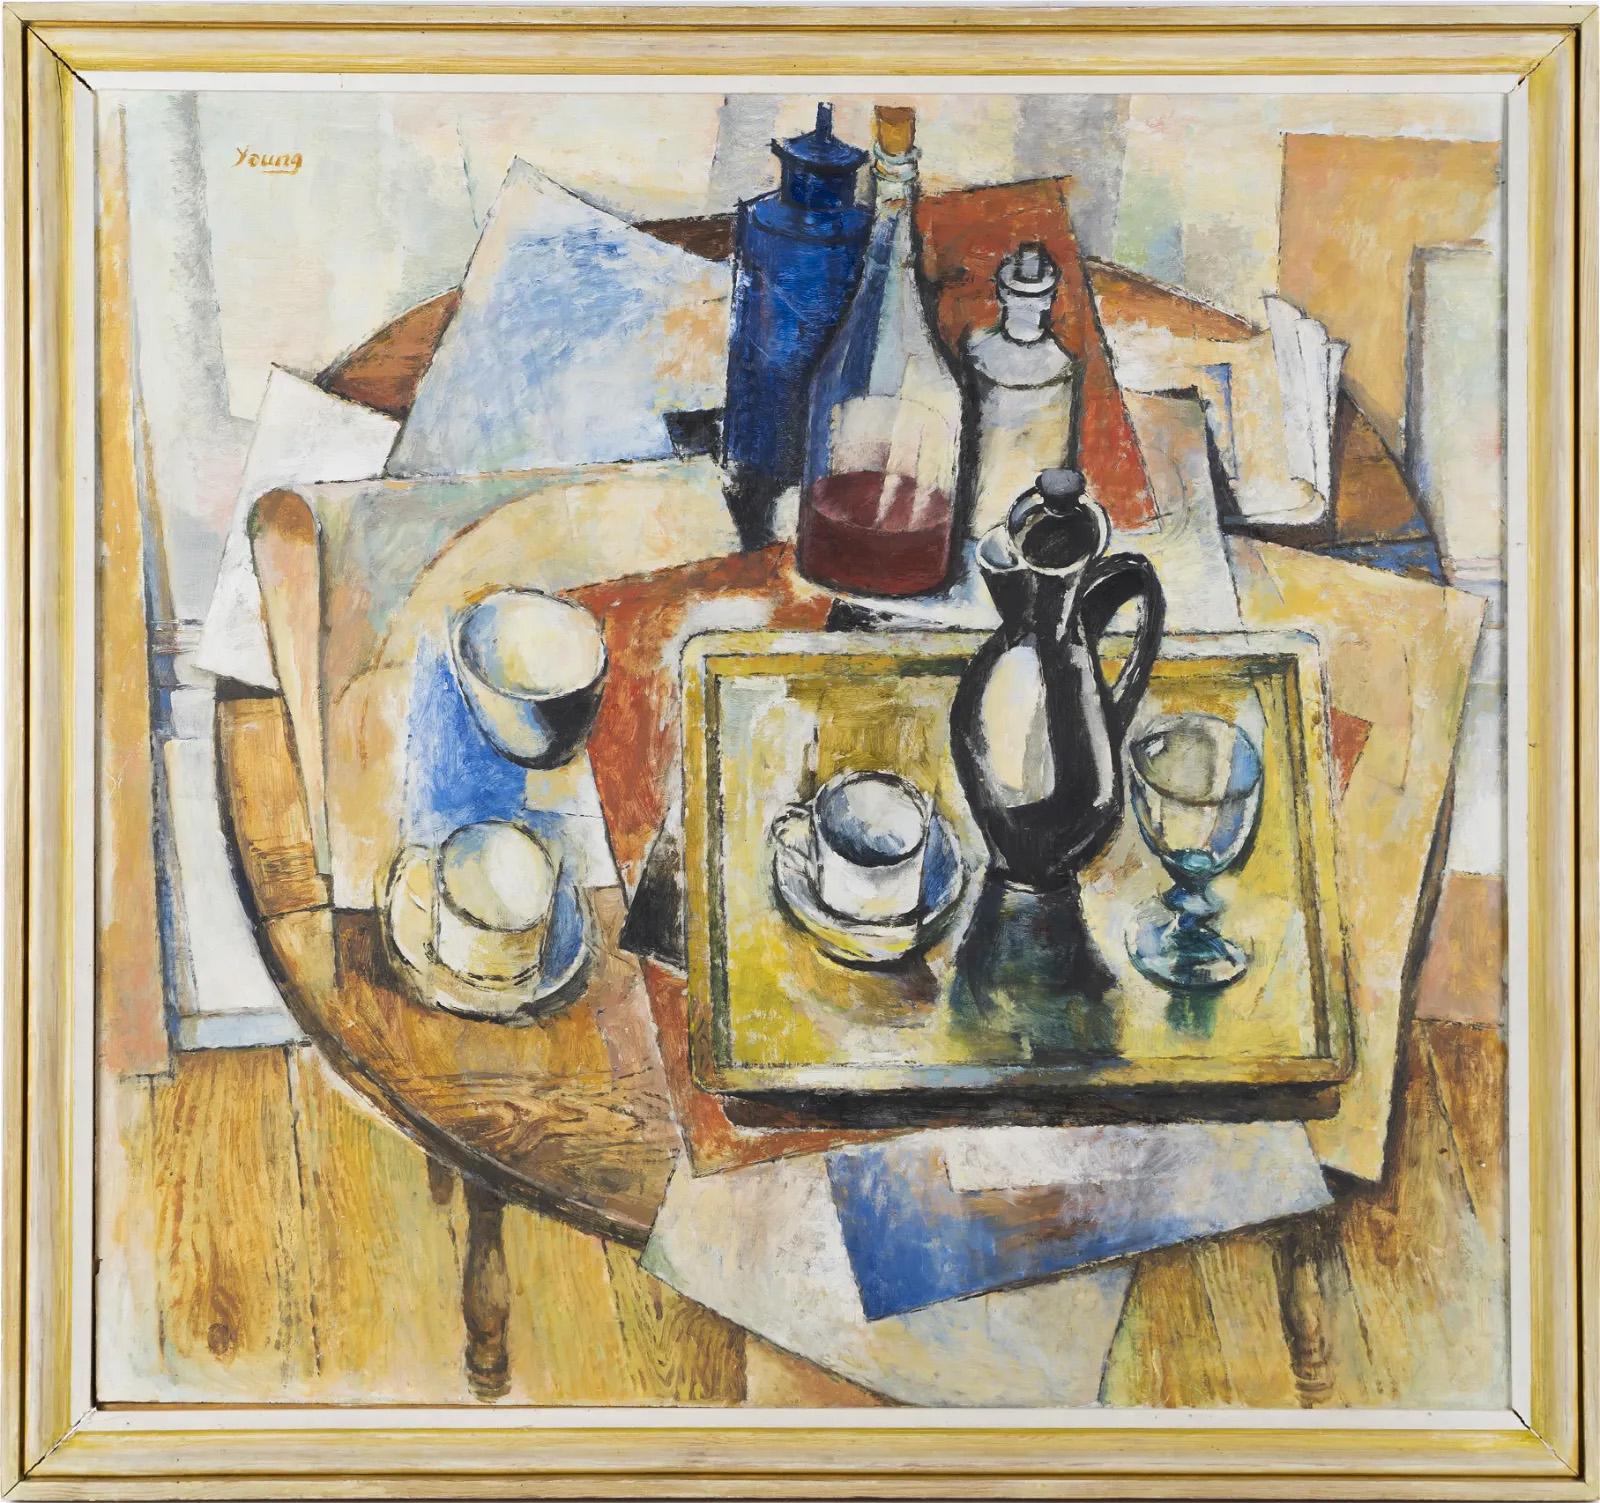 Finely painted vintage American modernist still life.  Cubist composition with great color.  Oil on board.  Framed.  Signed.  